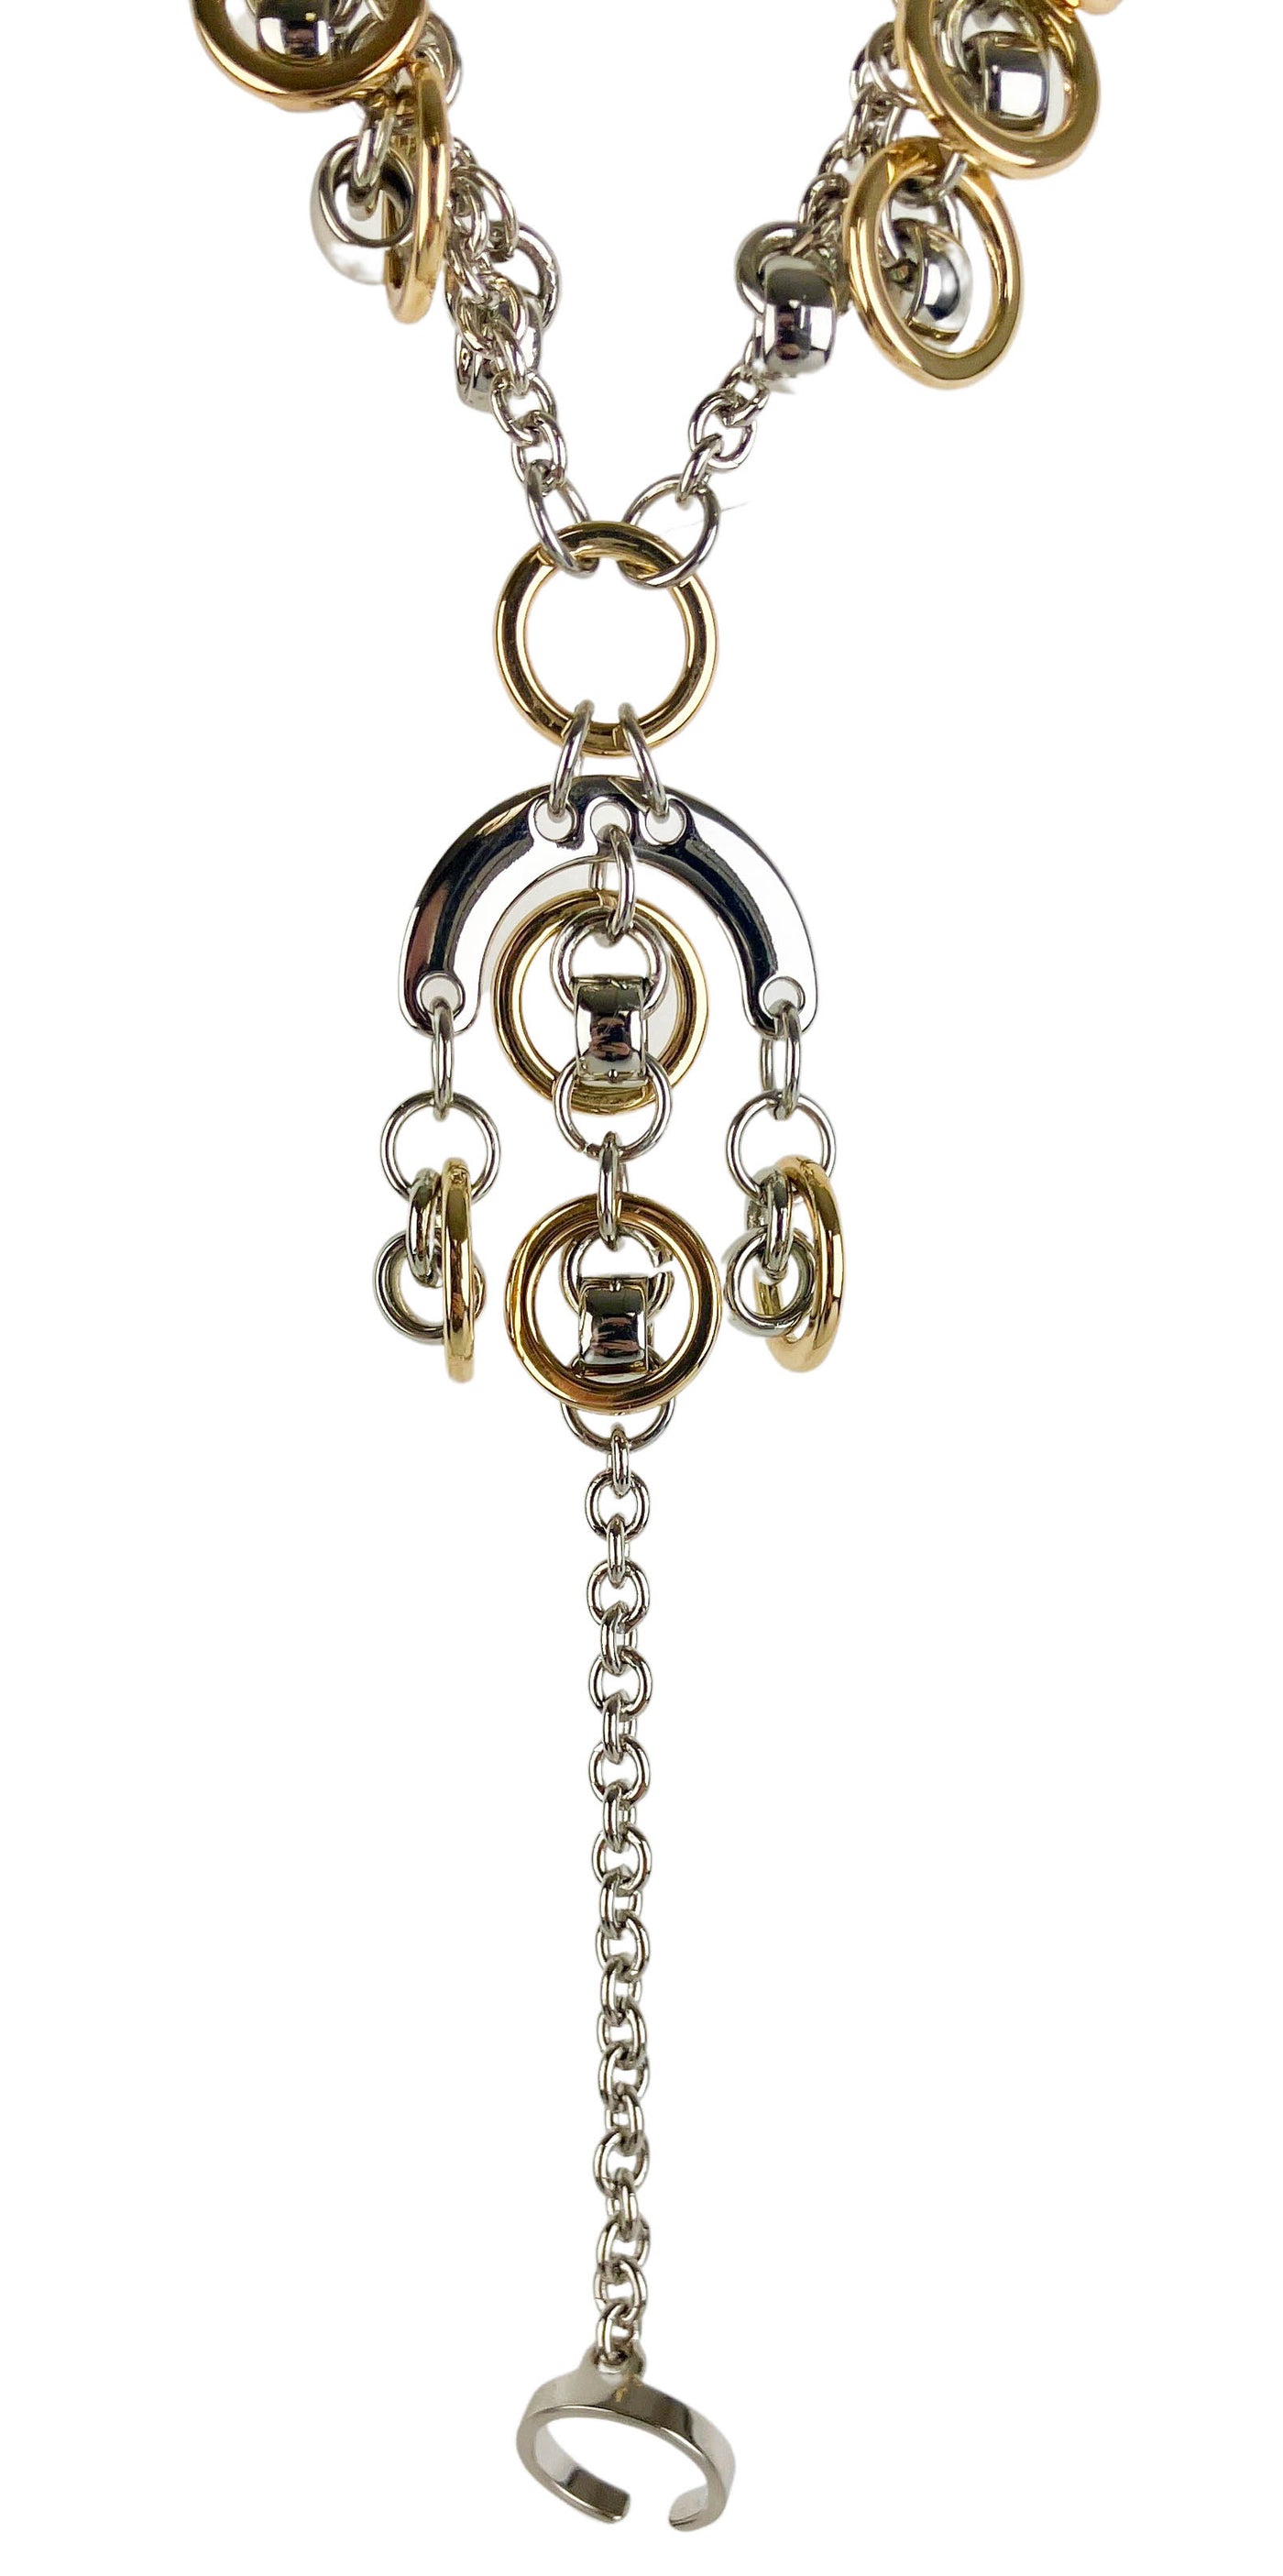 Paco Rabanne Silver and Gold Sphere Ankle Chain - Discounts on Paco Rabanne at UAL